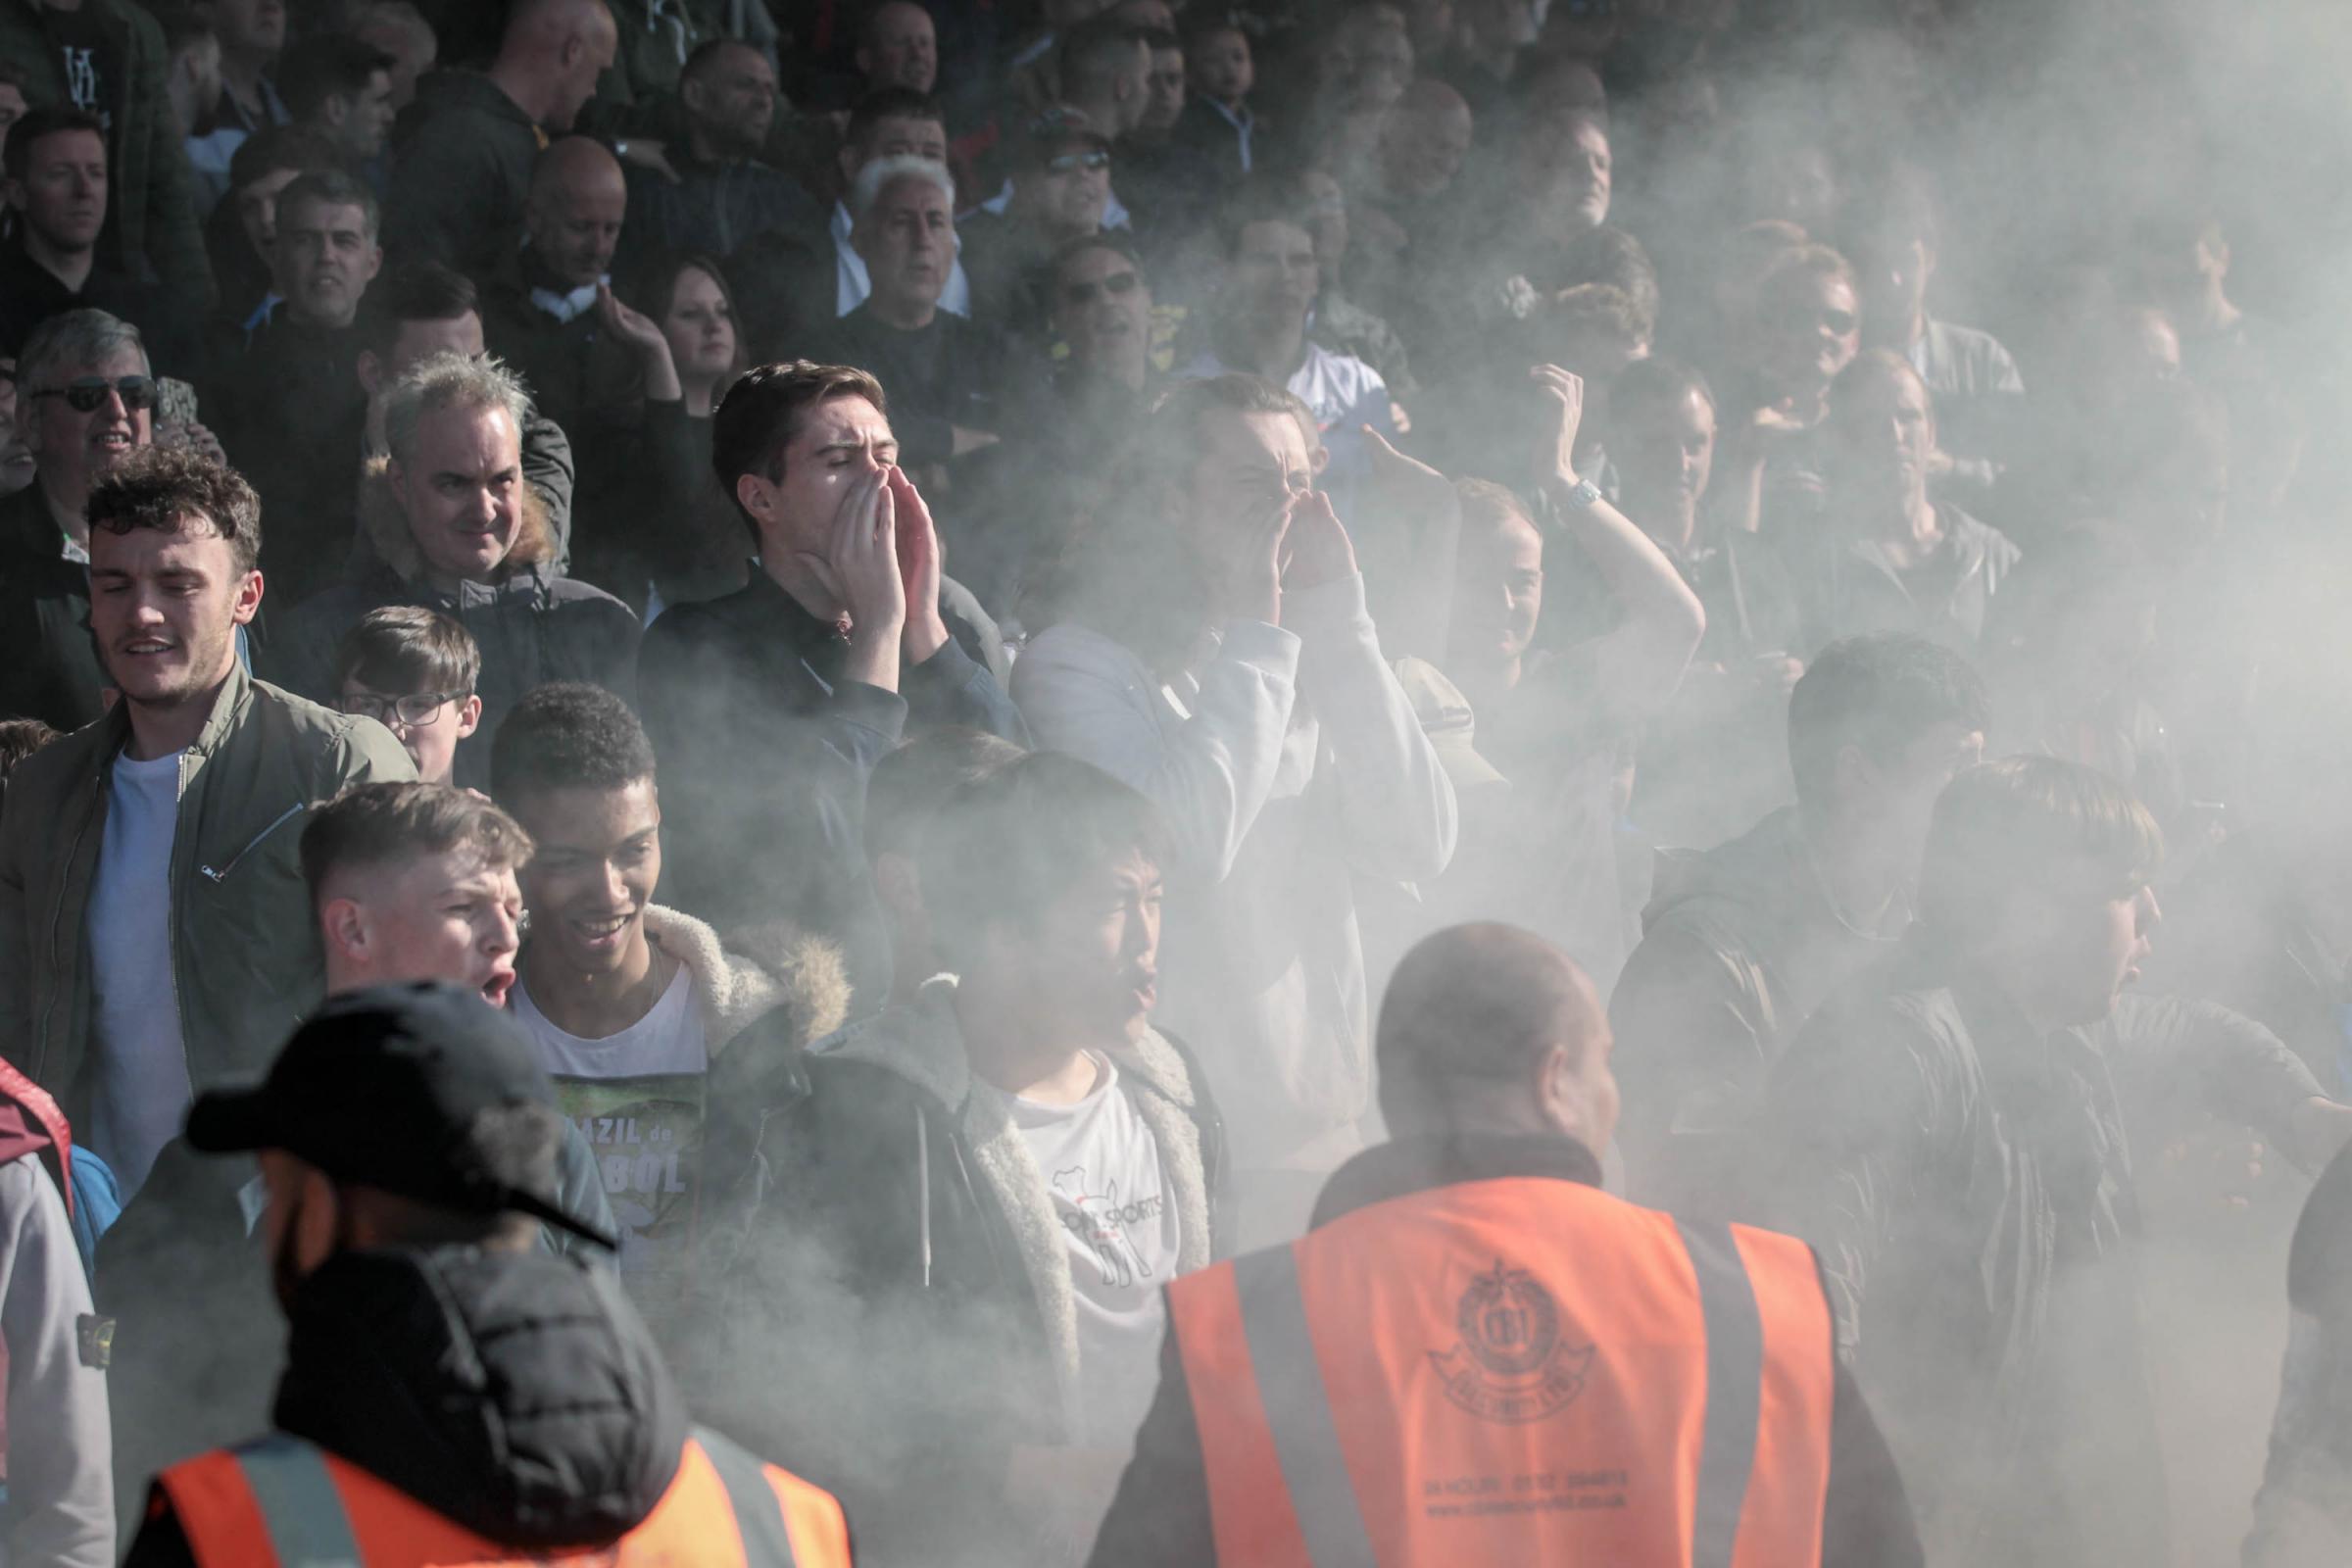 5 arrests after flare causes '£2,000 worth of damage to bus' following Wanderers match